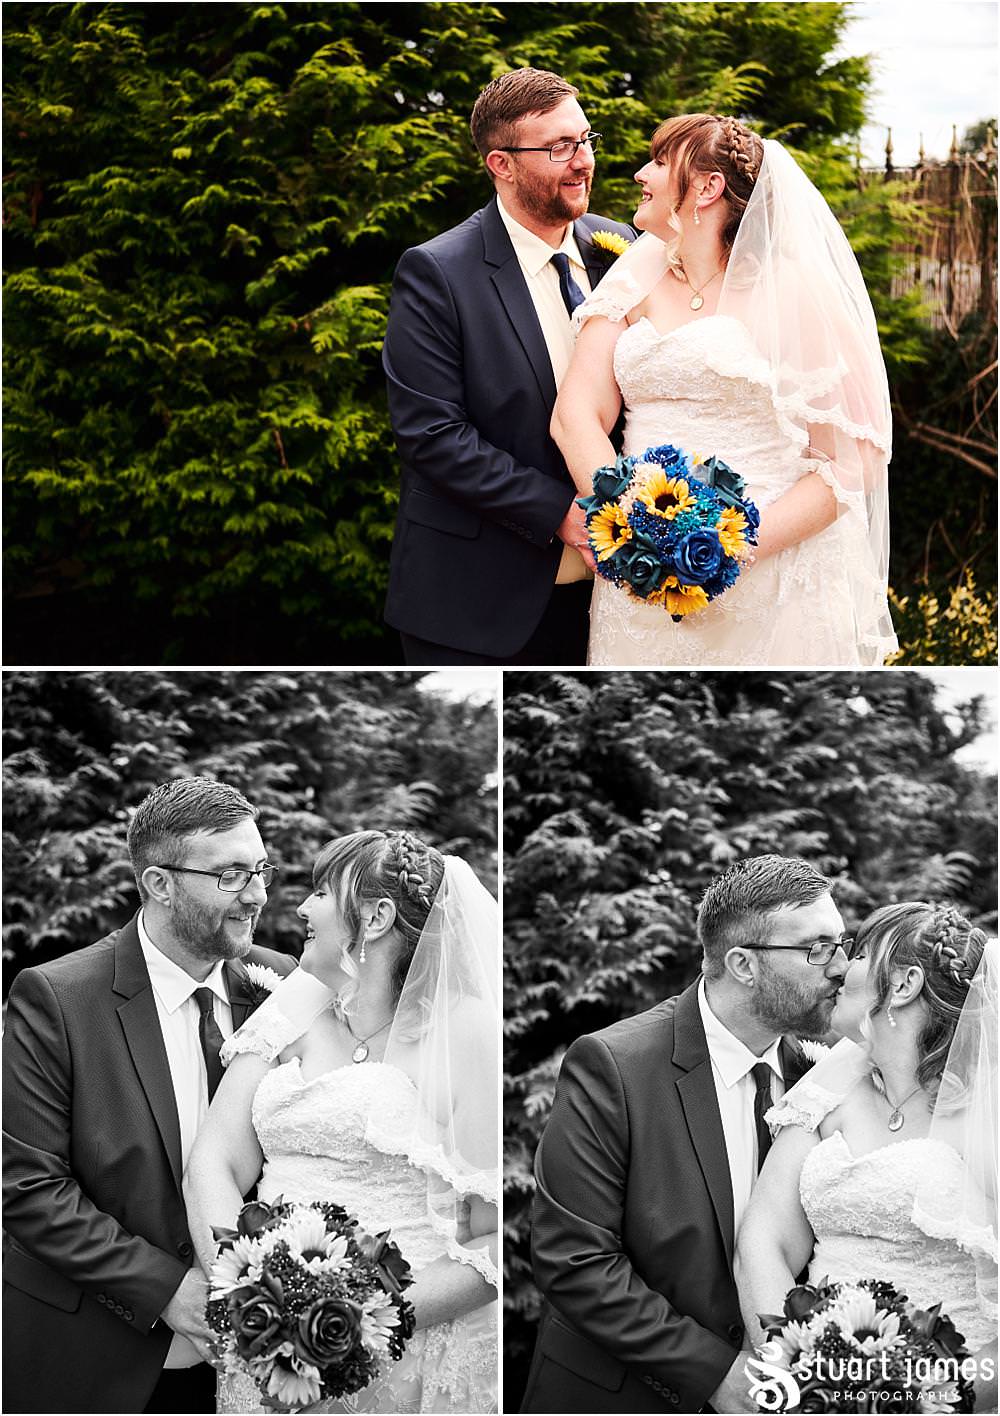 Relaxed portraits of the bride and groom in the beautiful gardens at Oak Farm Hotel in Cannock - Oak Farm Wedding Photographs by Stuart James